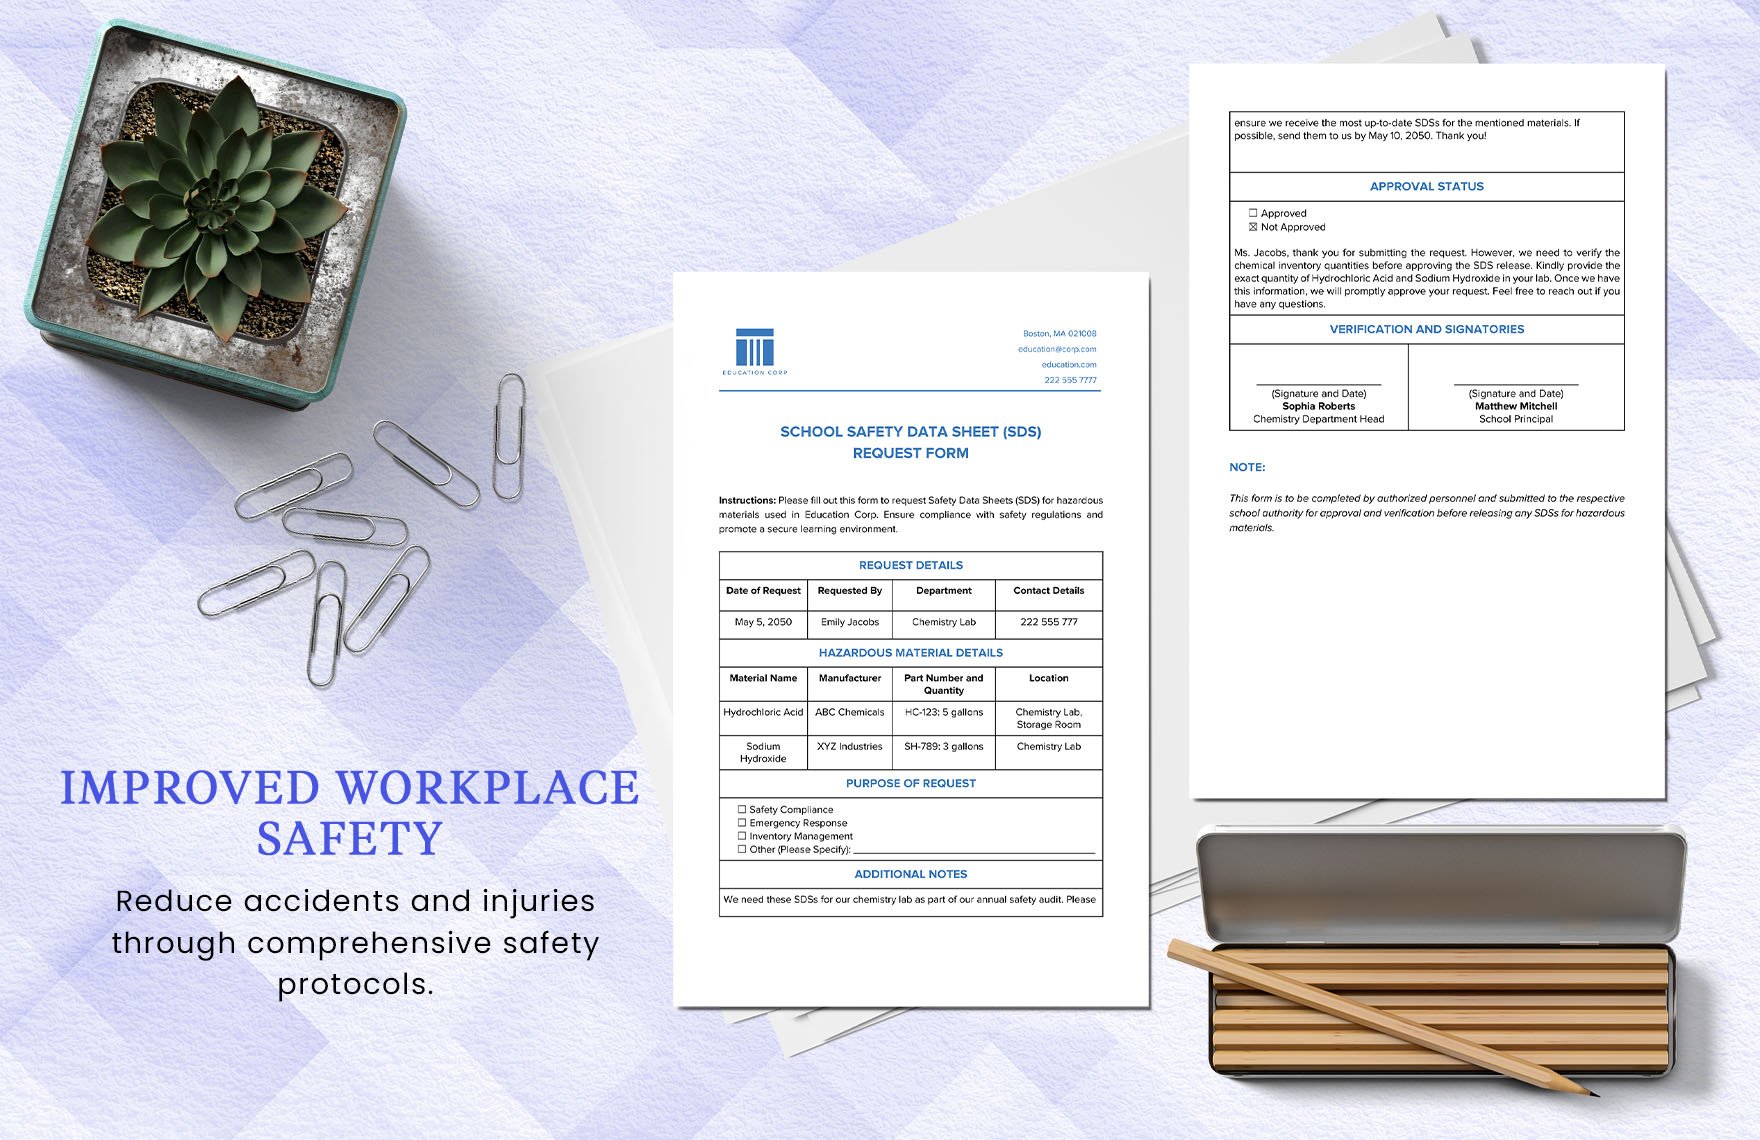 School Safety Data Sheet (SDS) Request Form Template